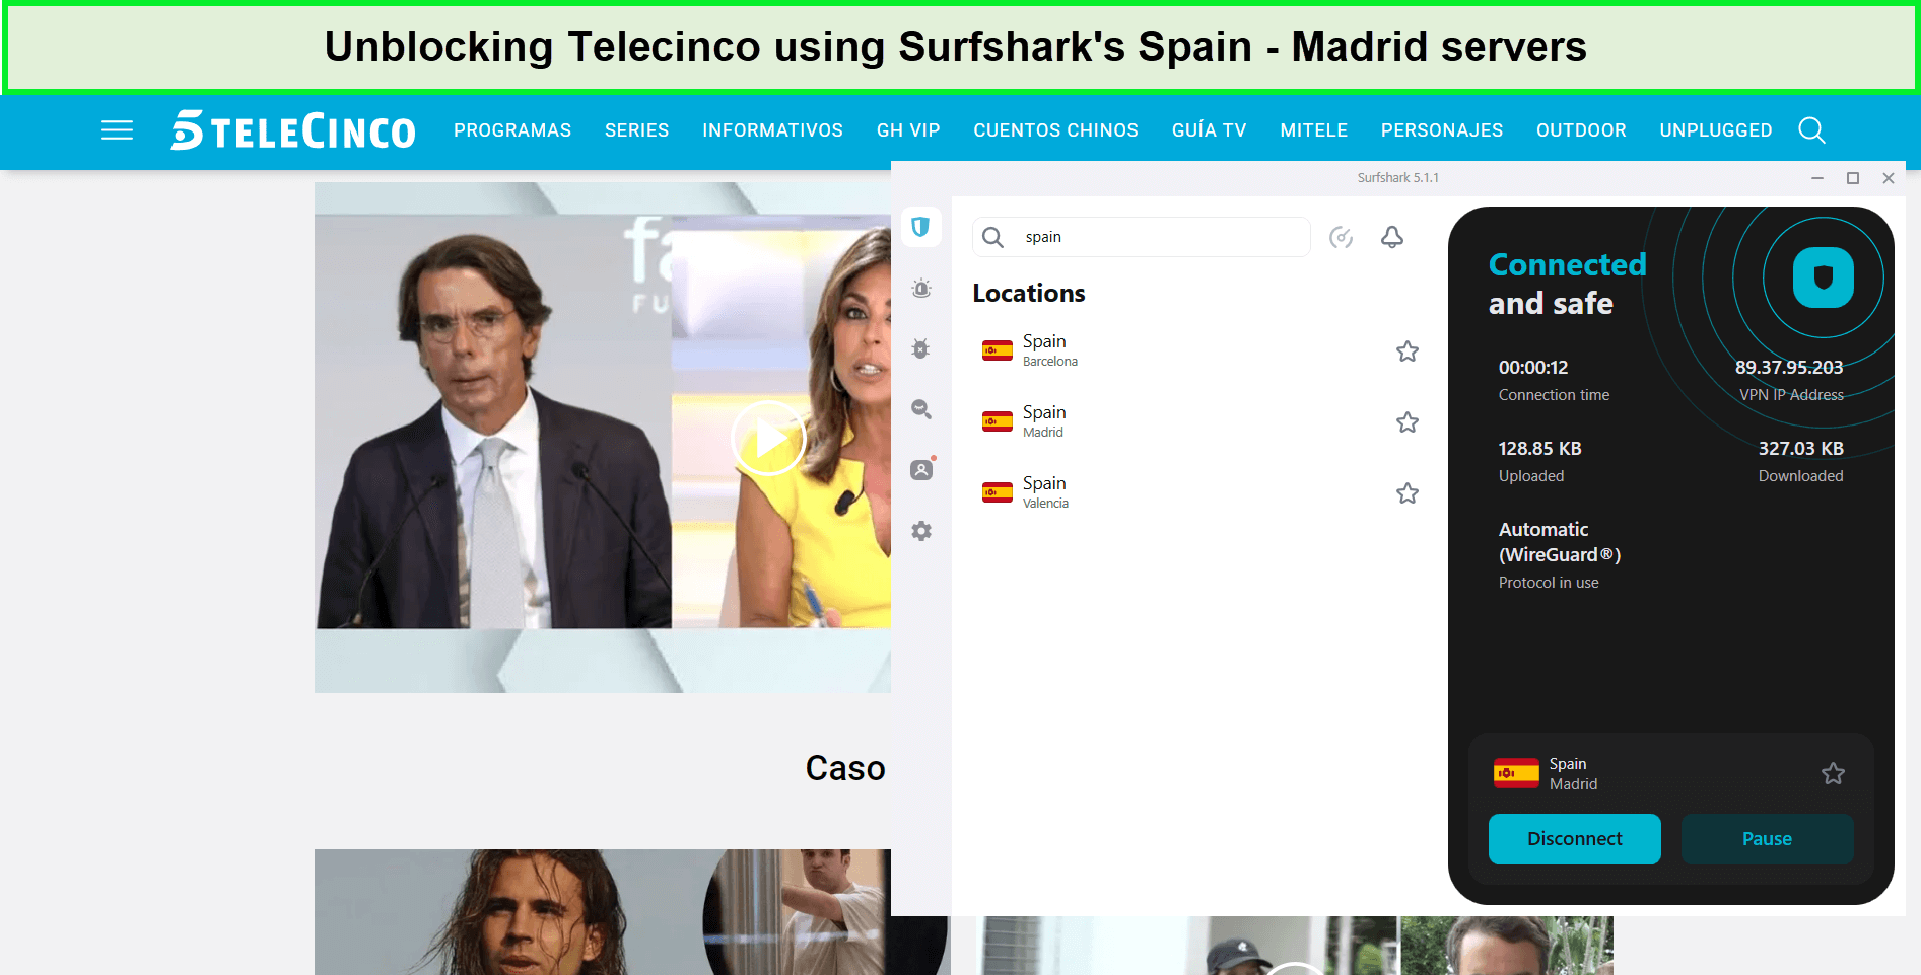 telecinco-in-USA-unblocked-by-surfshark